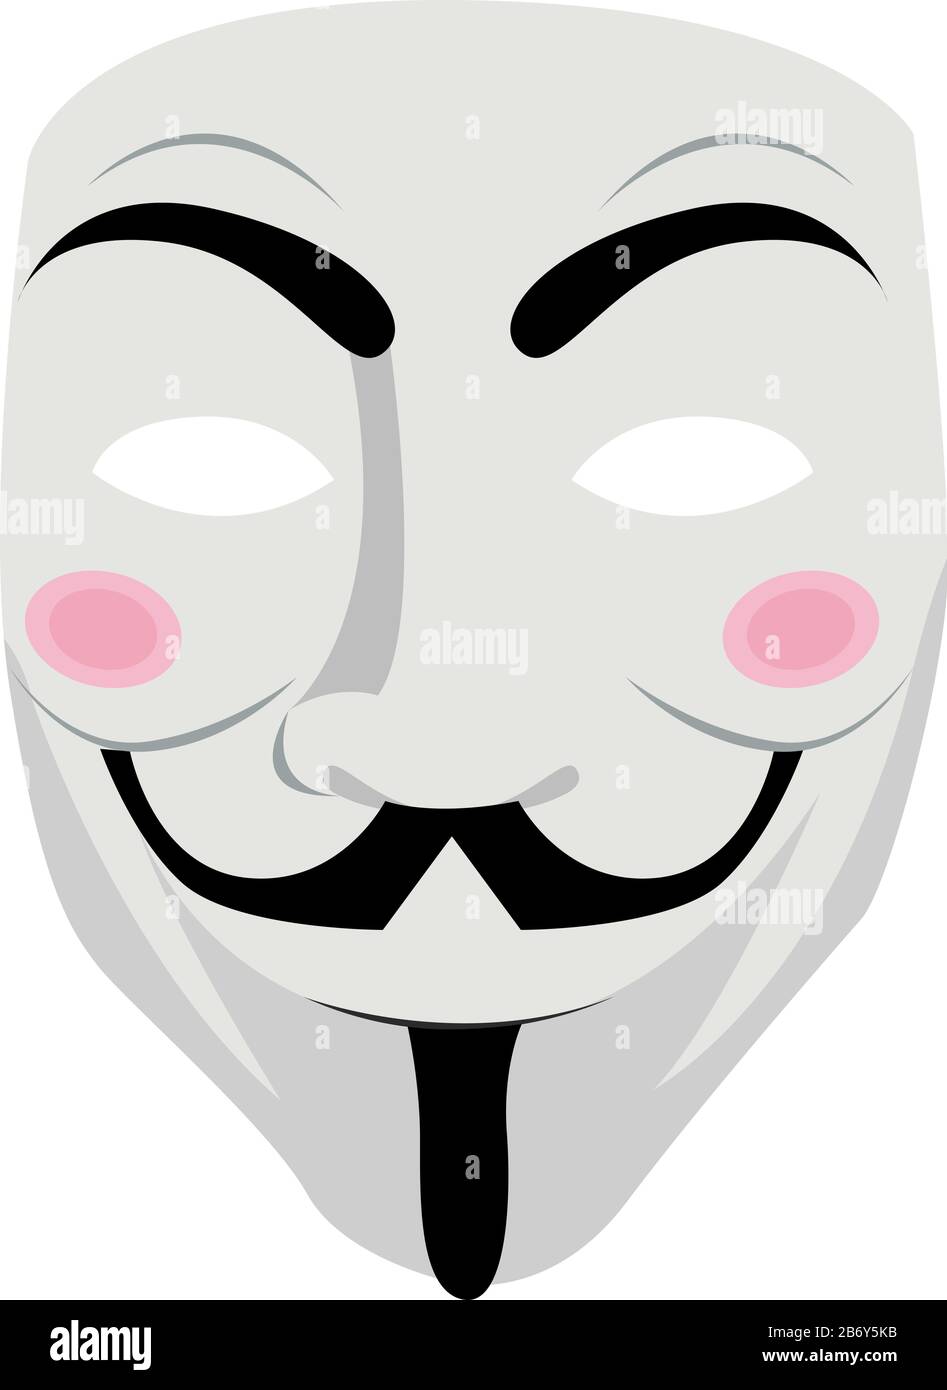 Guy fawkes mask Cut Out Stock Images & Pictures - Alamy